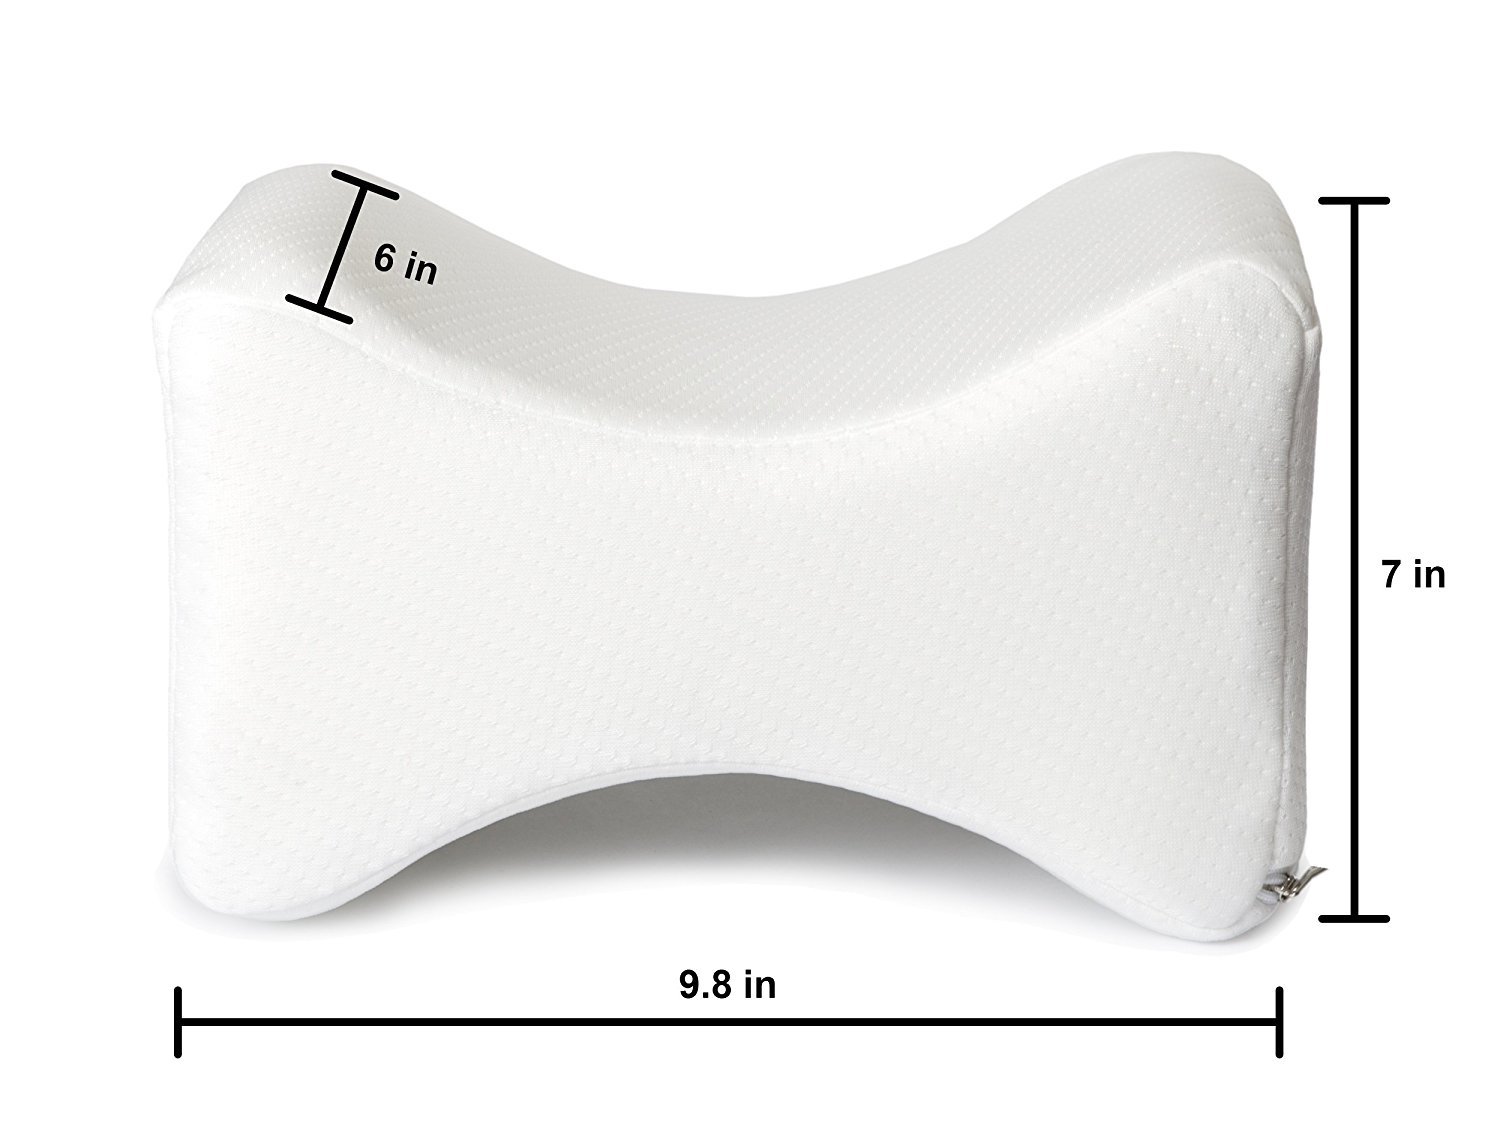 ZIRAKI Memory Foam Wedge Contour Orthopedic Knee Pillow for Sciatica Nerve Relief, Back, Leg, Hip, and Joint Pain, Leg Support, Spine Alignment, Pregnancy Cushion